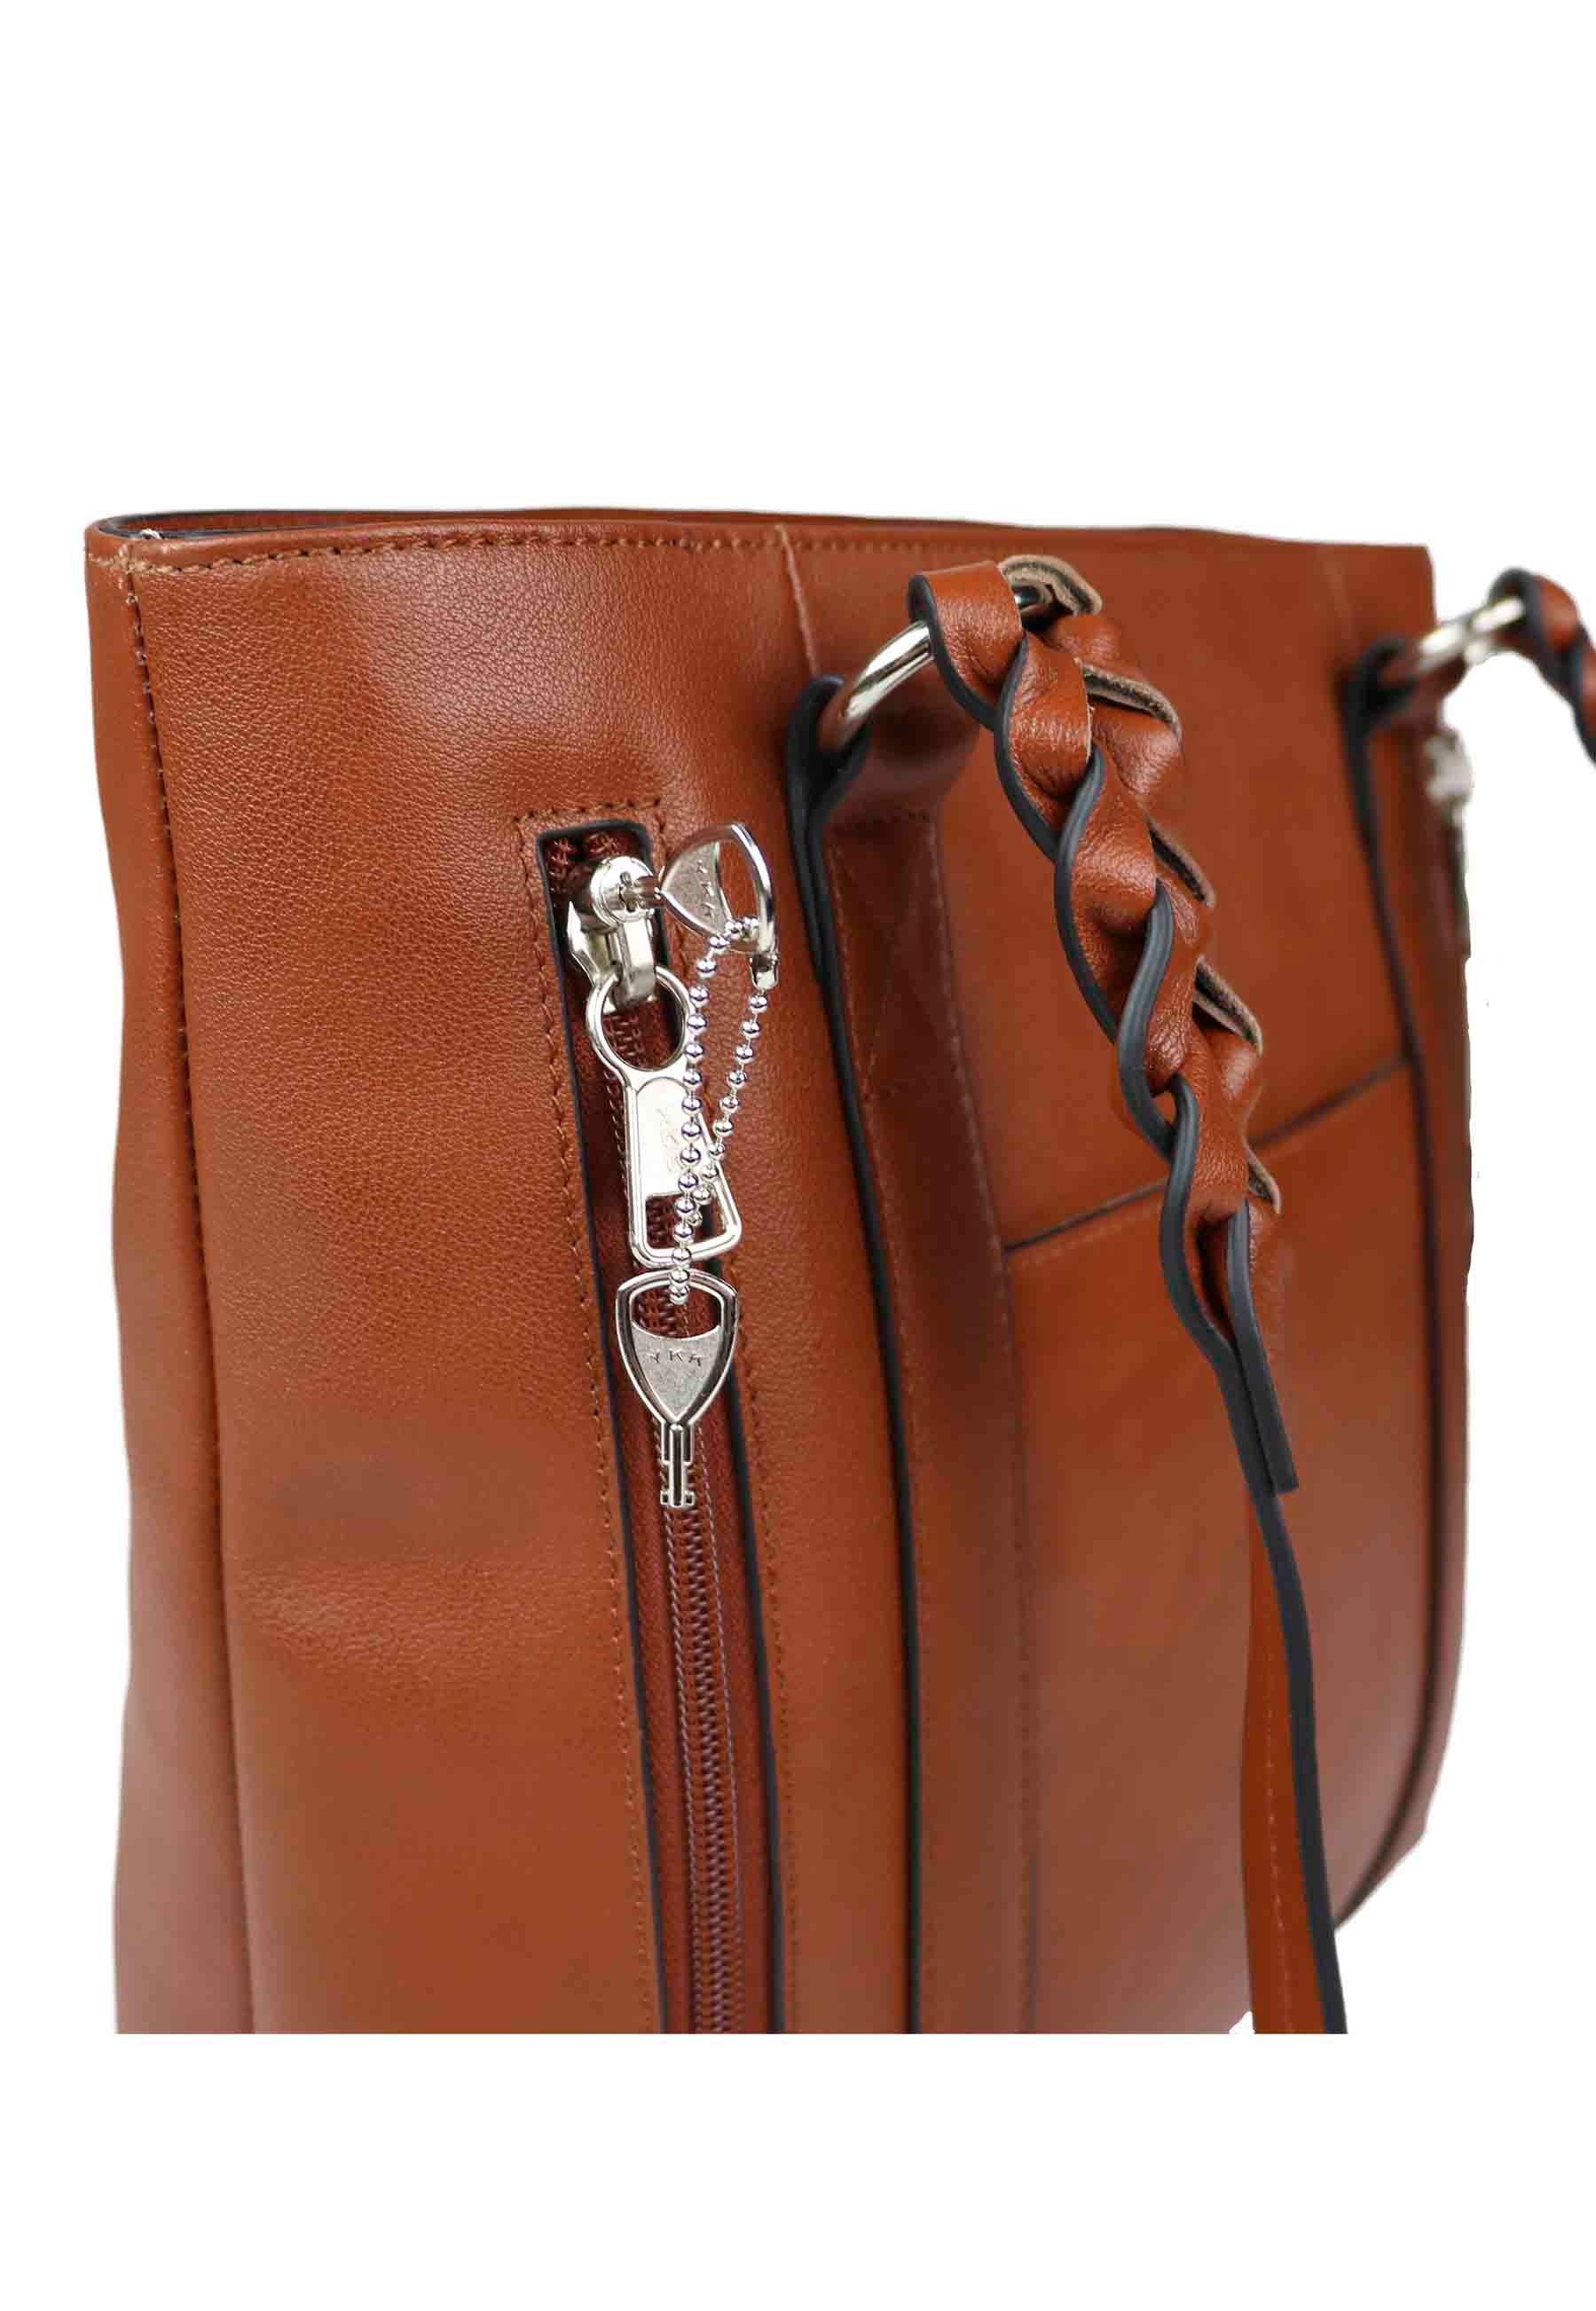 Desinery PU Leather Sling bags/Sling purse, Front flap with golden chrome  lock, 2 main zipper